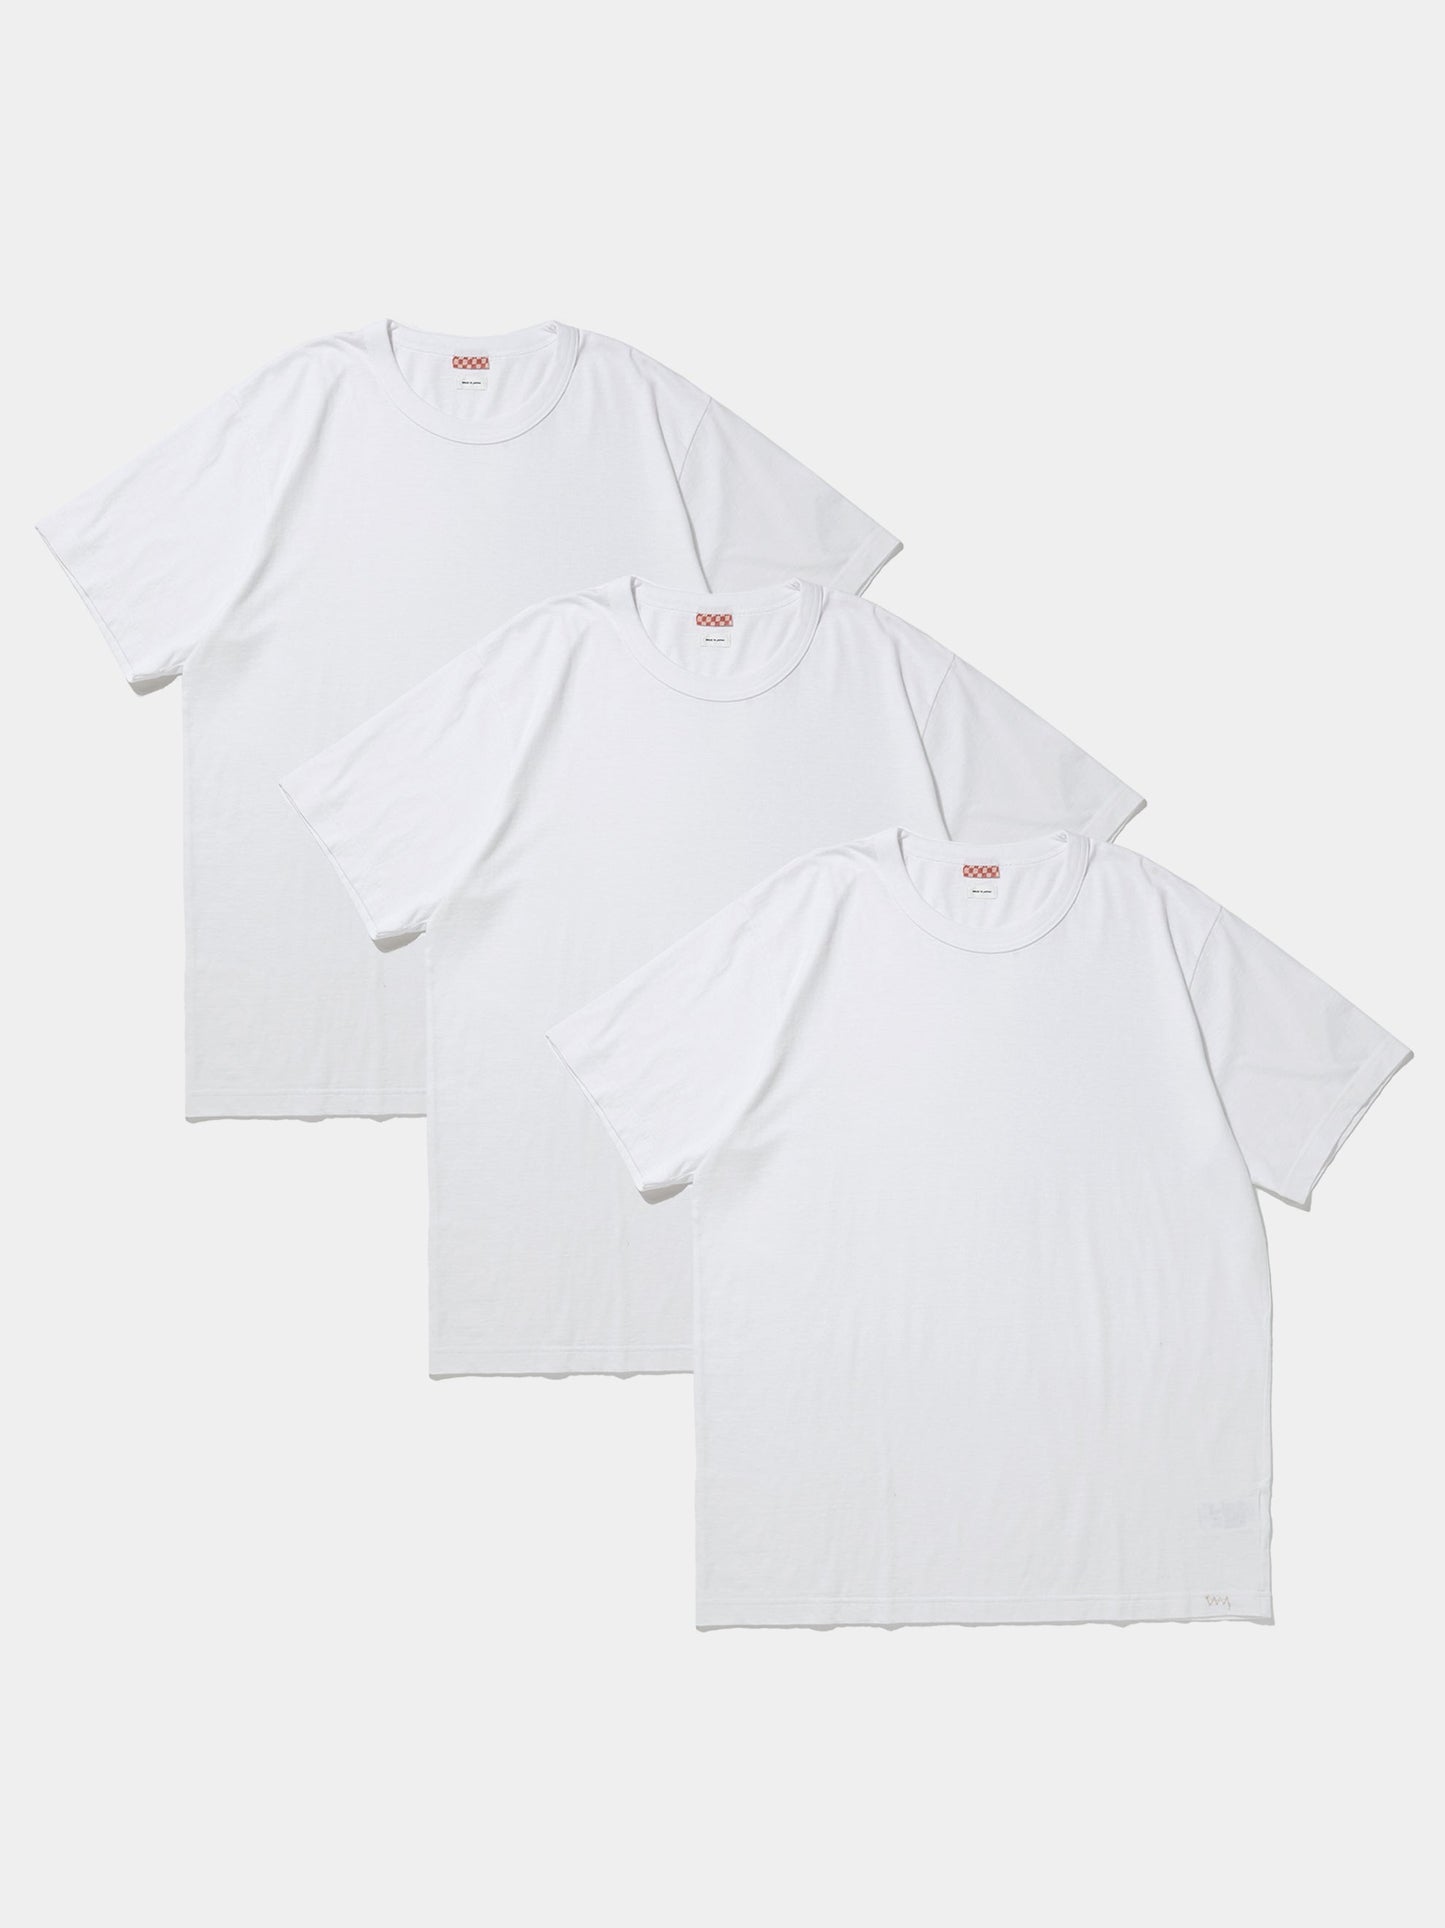 SUBLIG WIDE 3-PACK S/S